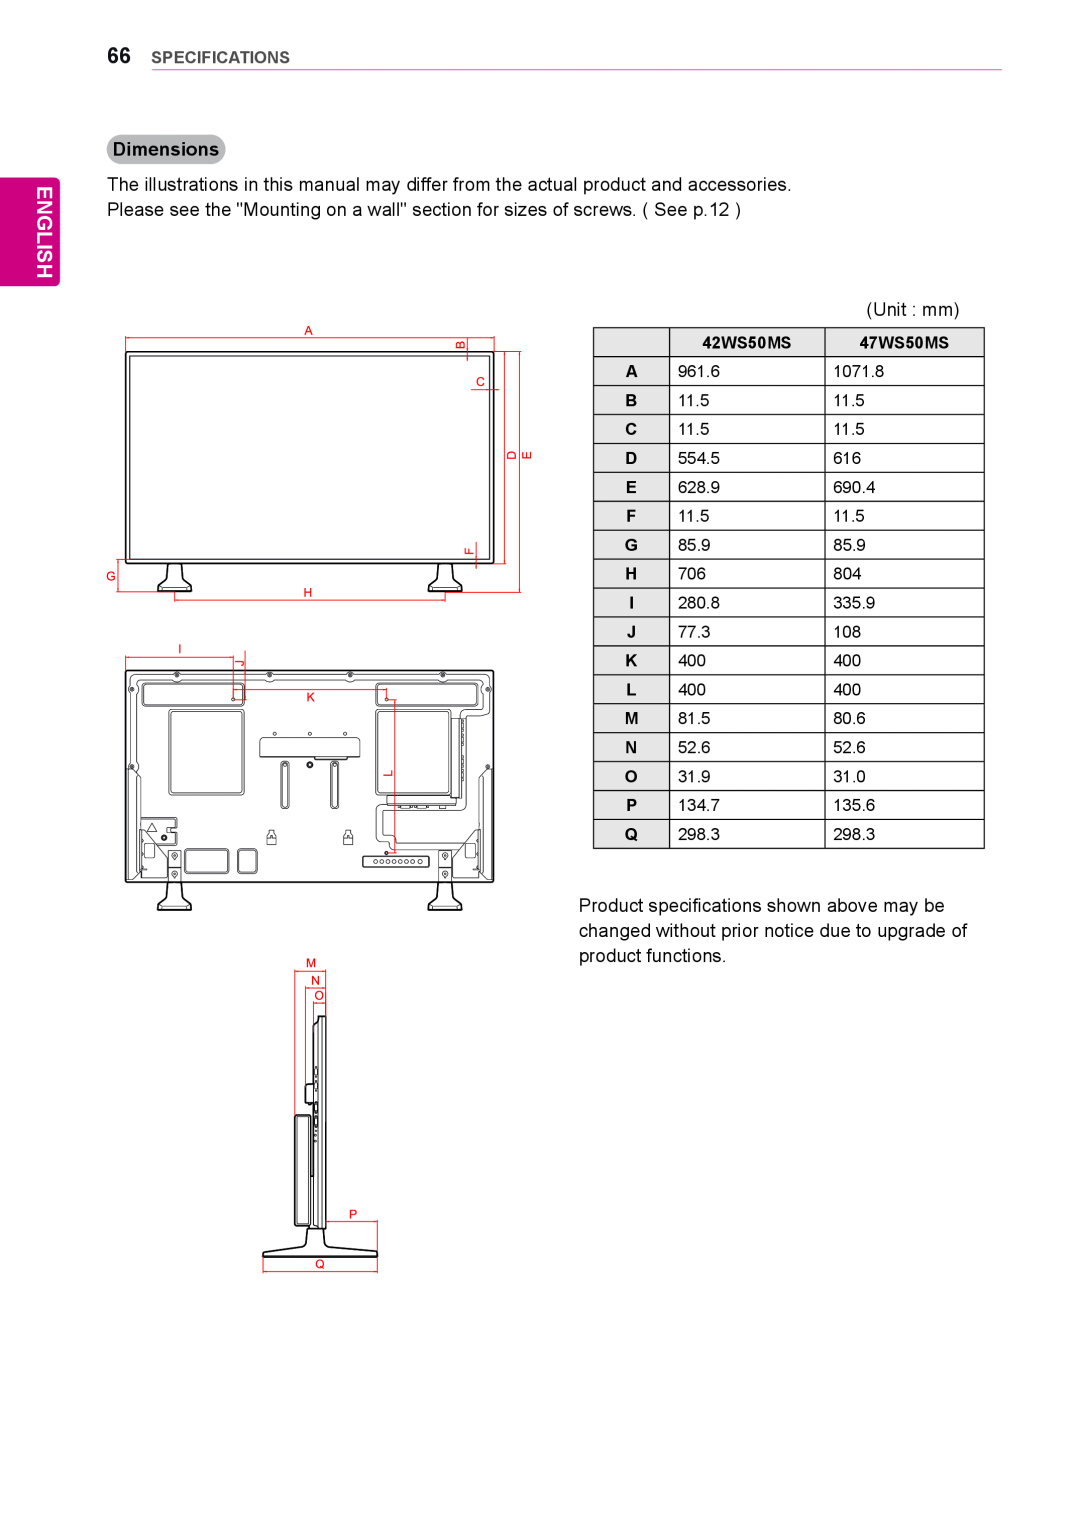 LG Electronics 42WS50MS, 47WS50MS owner manual English, Dimensions, Specifications 